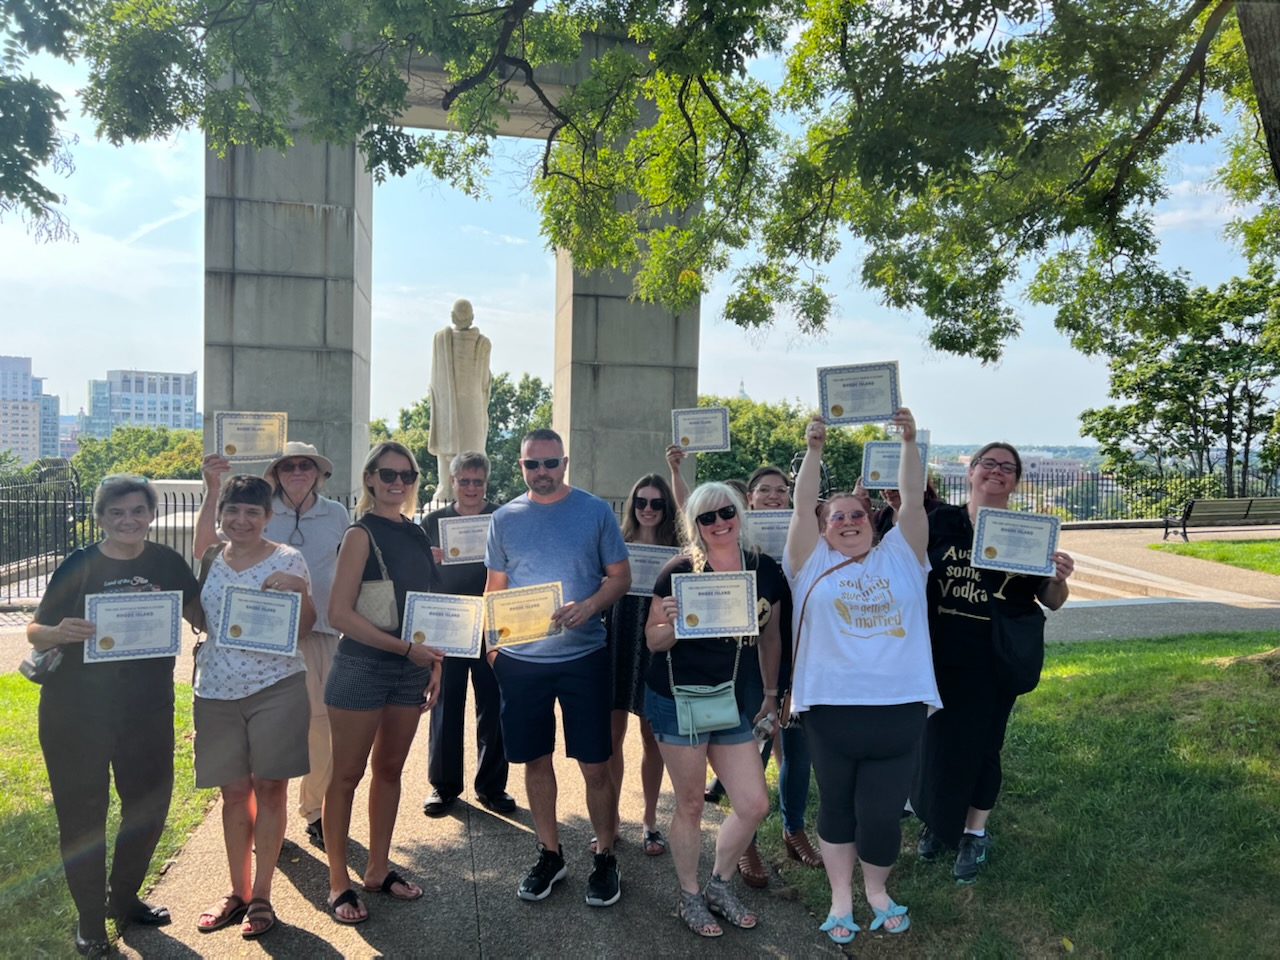 Group picture of tourists with their certificates of tour completion at the Roger Williams Park, Providence, RI.